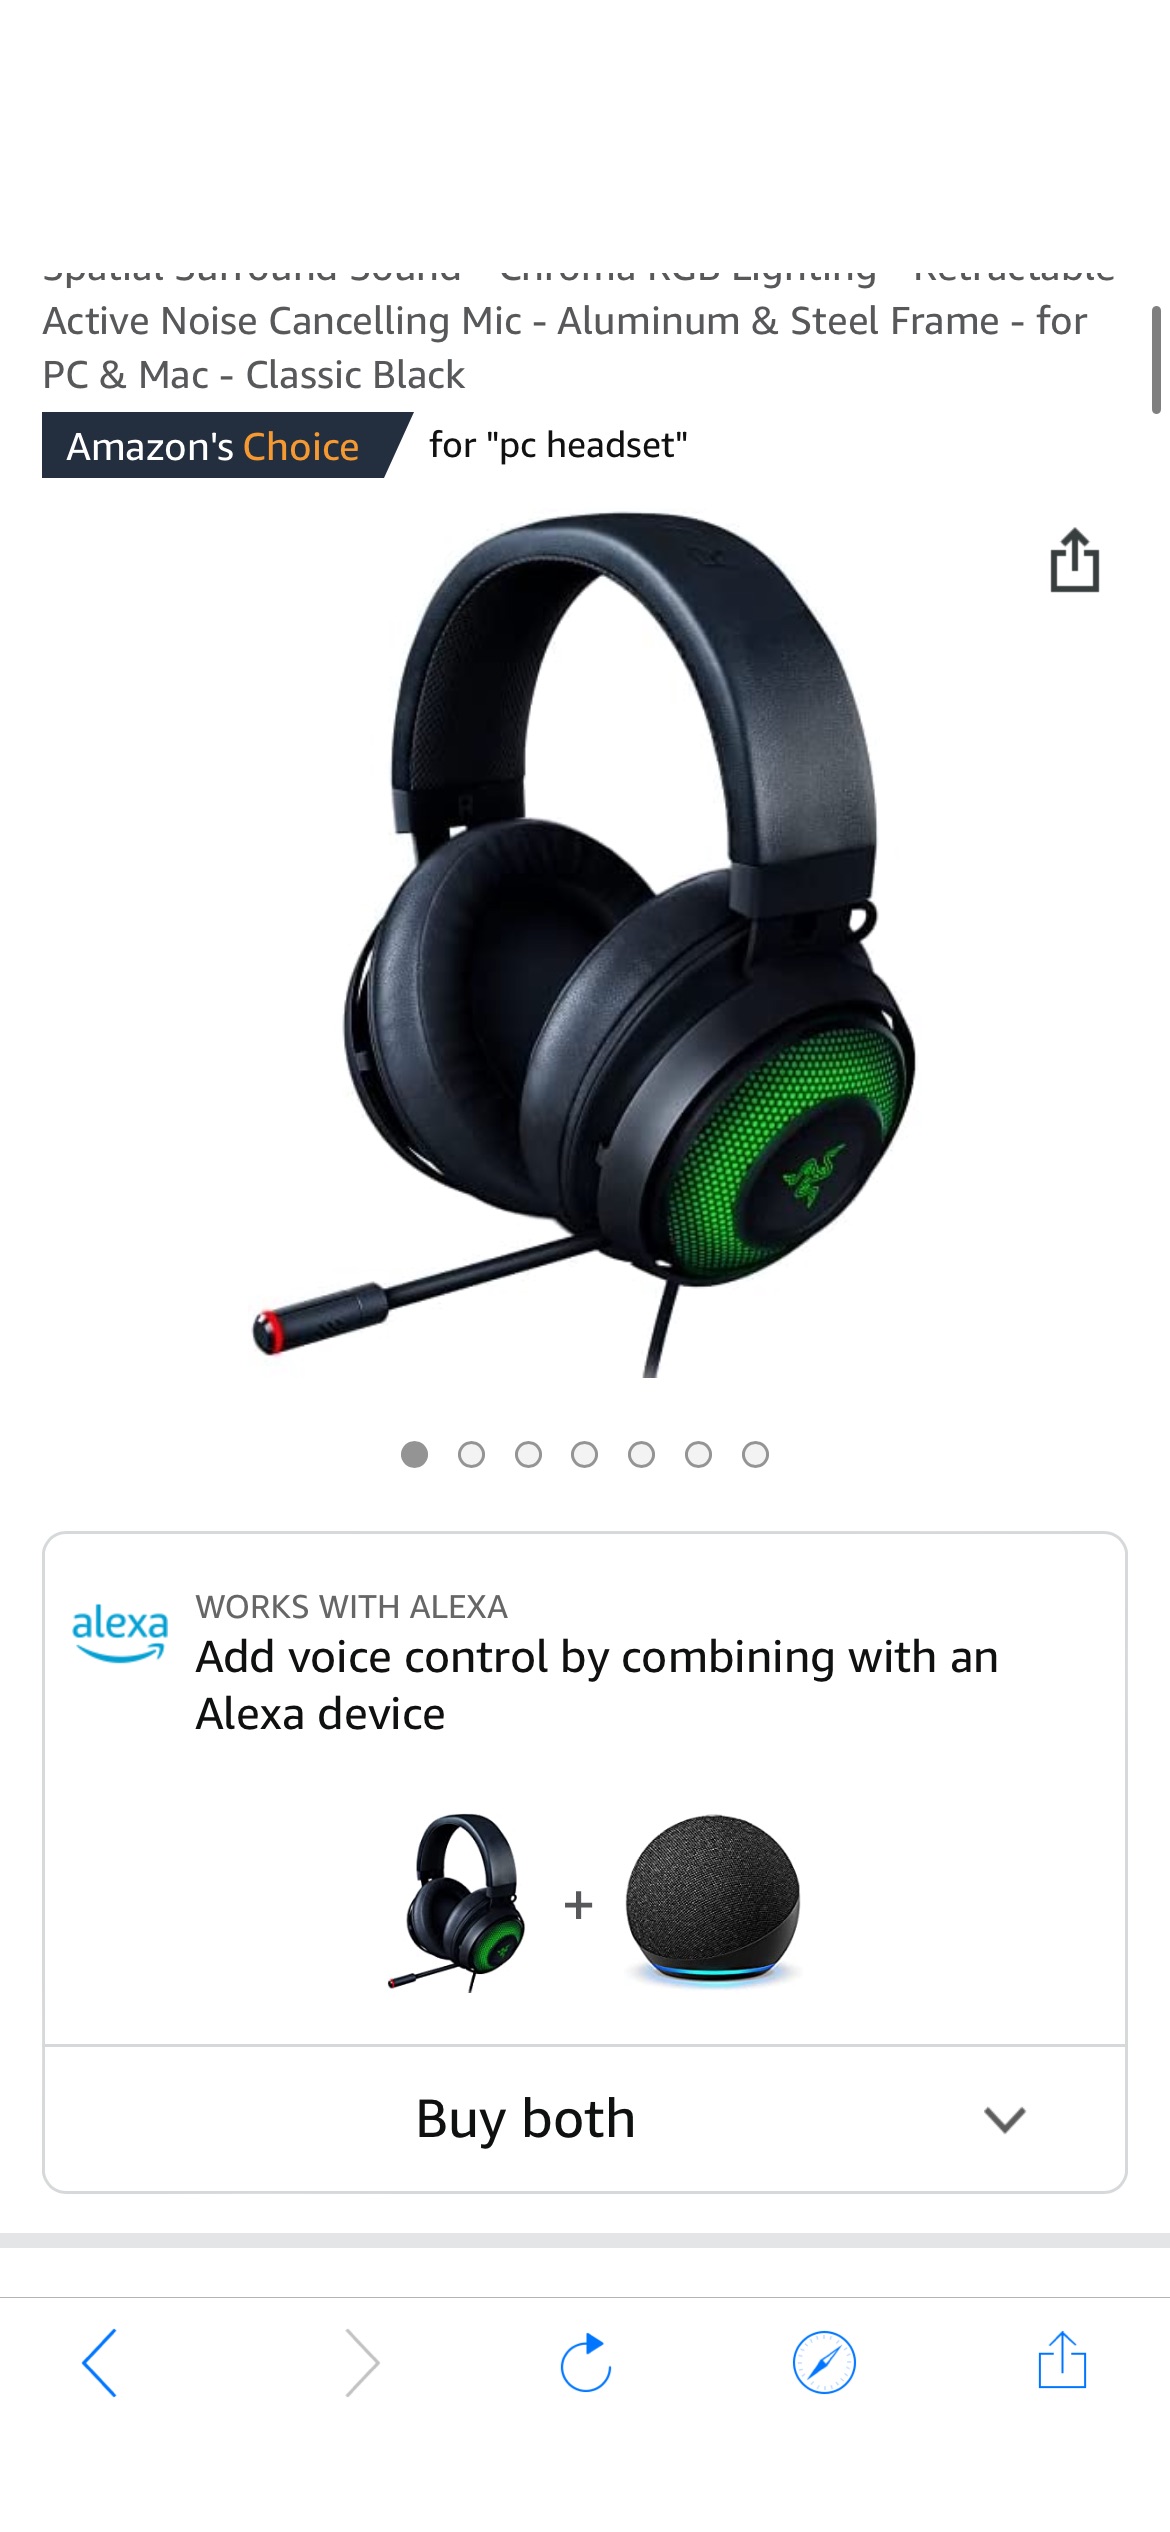 Headset: THX 7.1 Spatial Surround Sound - Chroma RGB Lighting - Retractable Active Noise Cancelling Mic - Aluminum & Steel Frame - for PC & Mac - Classic Black : Video Games 耳机